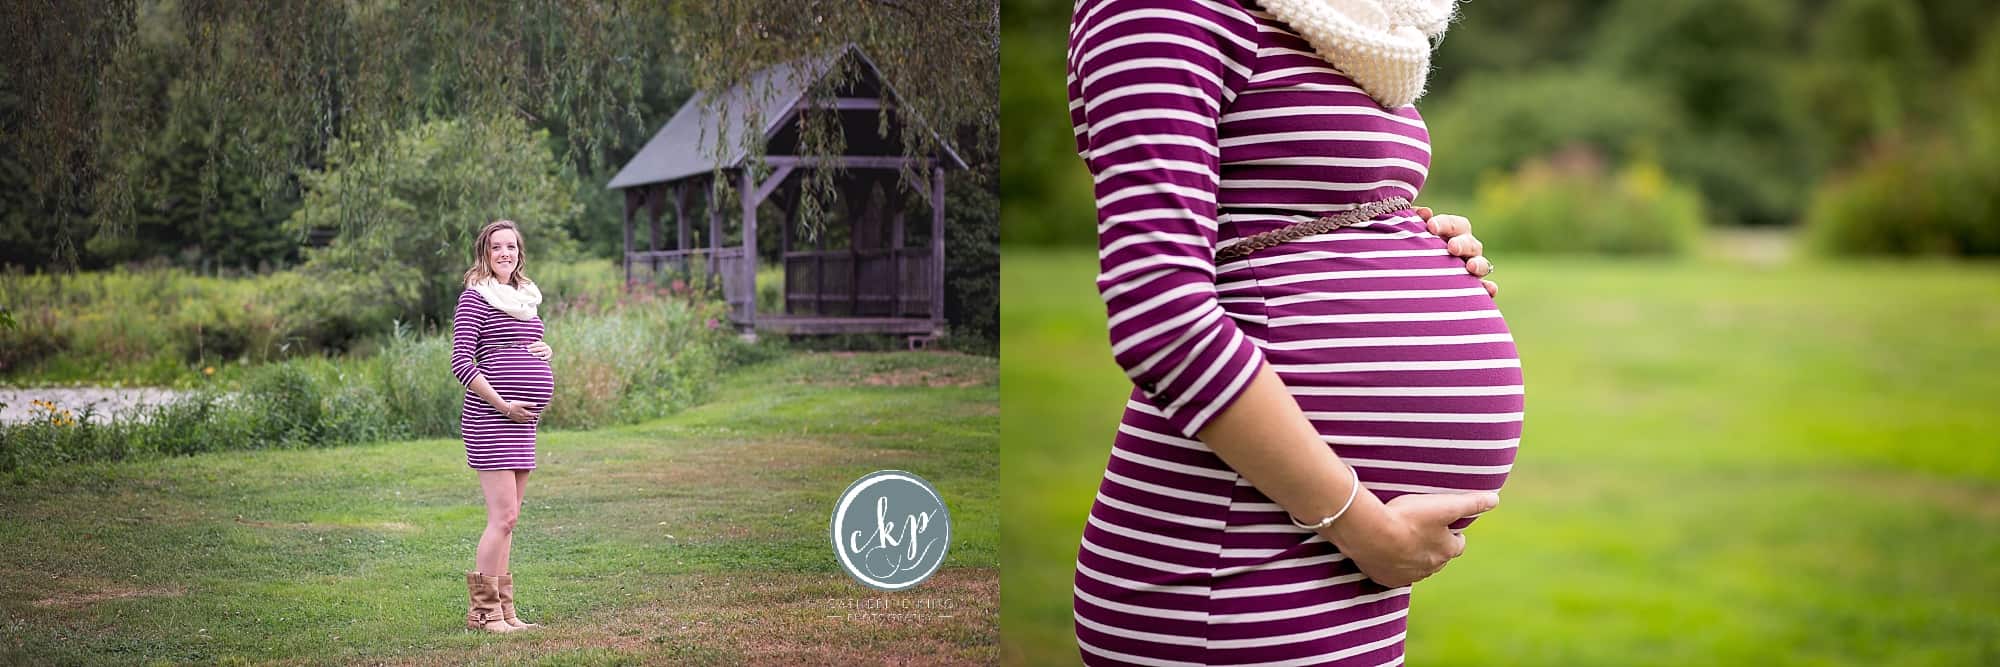 Rustic maternity photographer beach maternity photography in madison ct